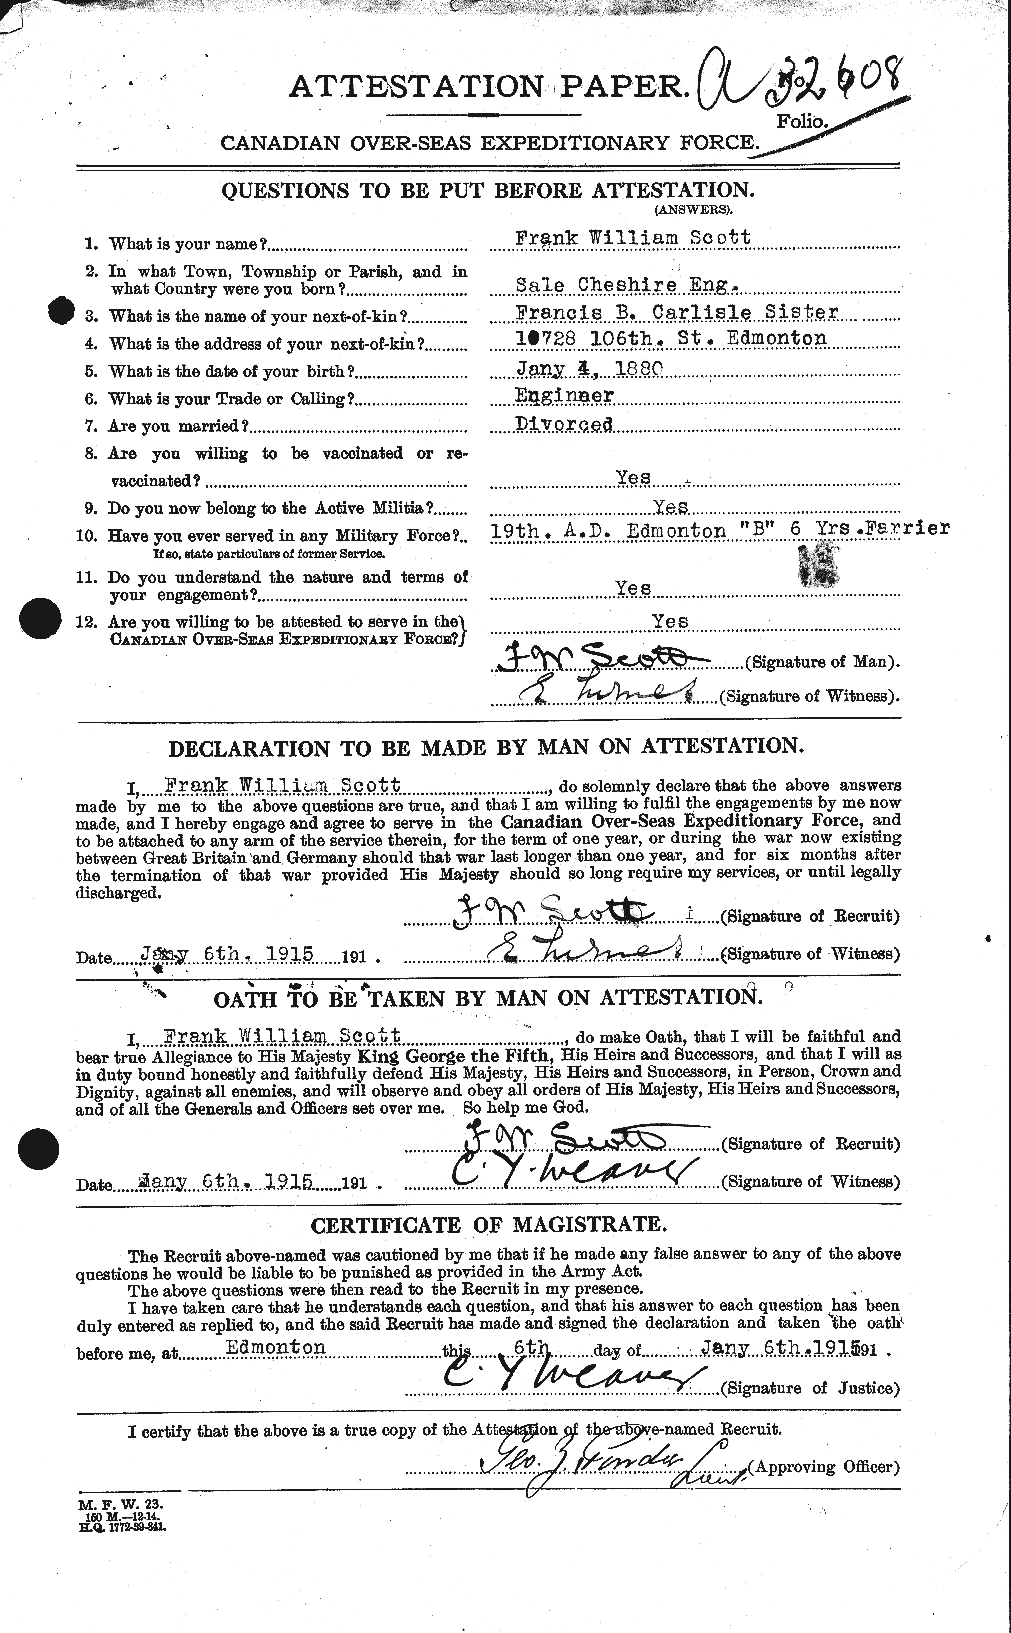 Personnel Records of the First World War - CEF 084687a